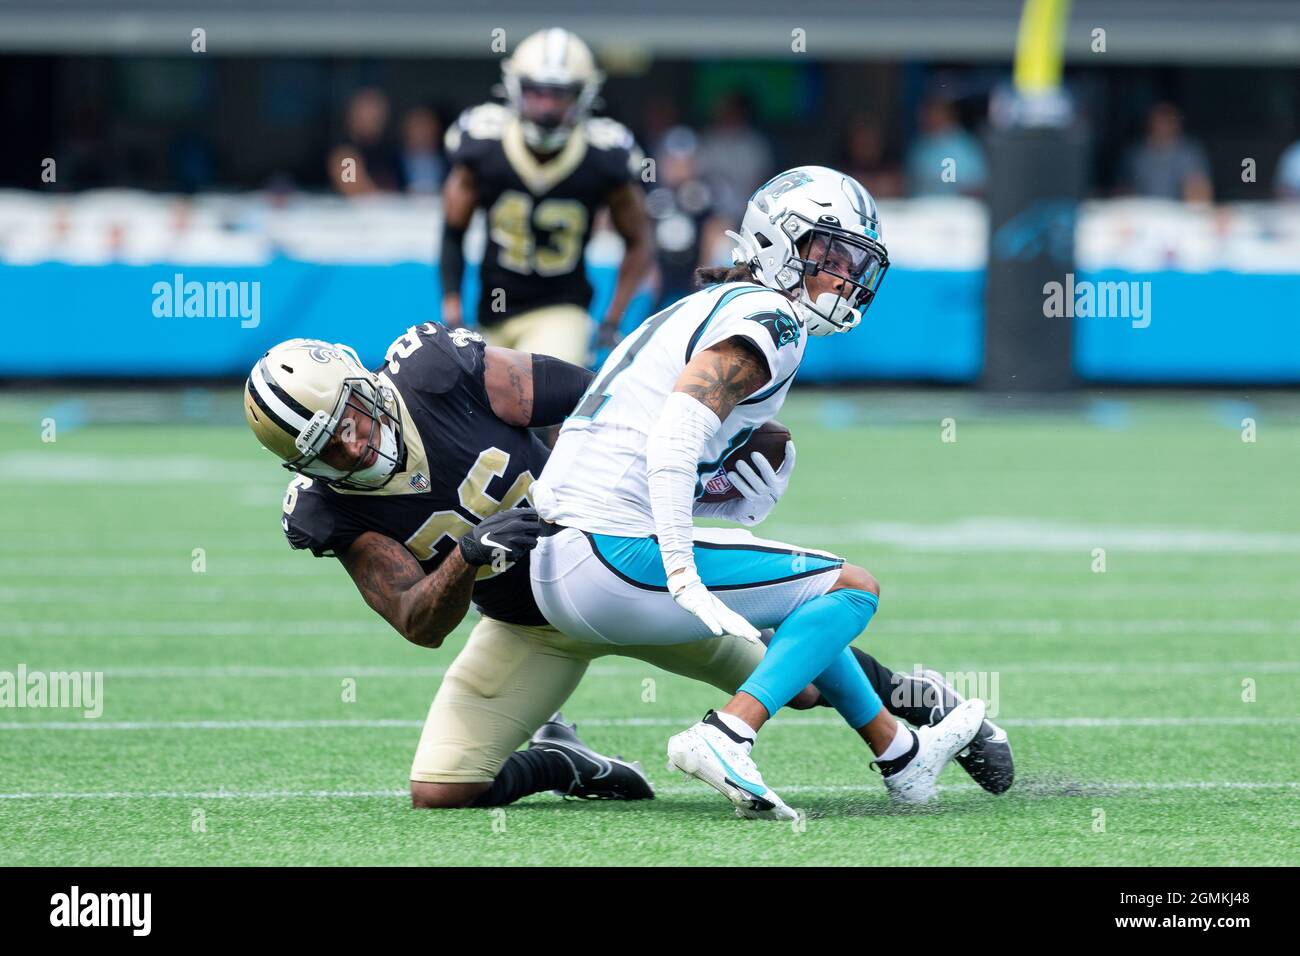 September 19, 2021: Carolina Panthers wide receiver Robby Anderson (11) gets pulled down by New Orleans Saints cornerback P.J. Williams (26) in the fourth quarter of the NFL matchup at Bank of America Stadium in Charlotte, NC. (Scott Kinser/Cal Sport Media) Stock Photo